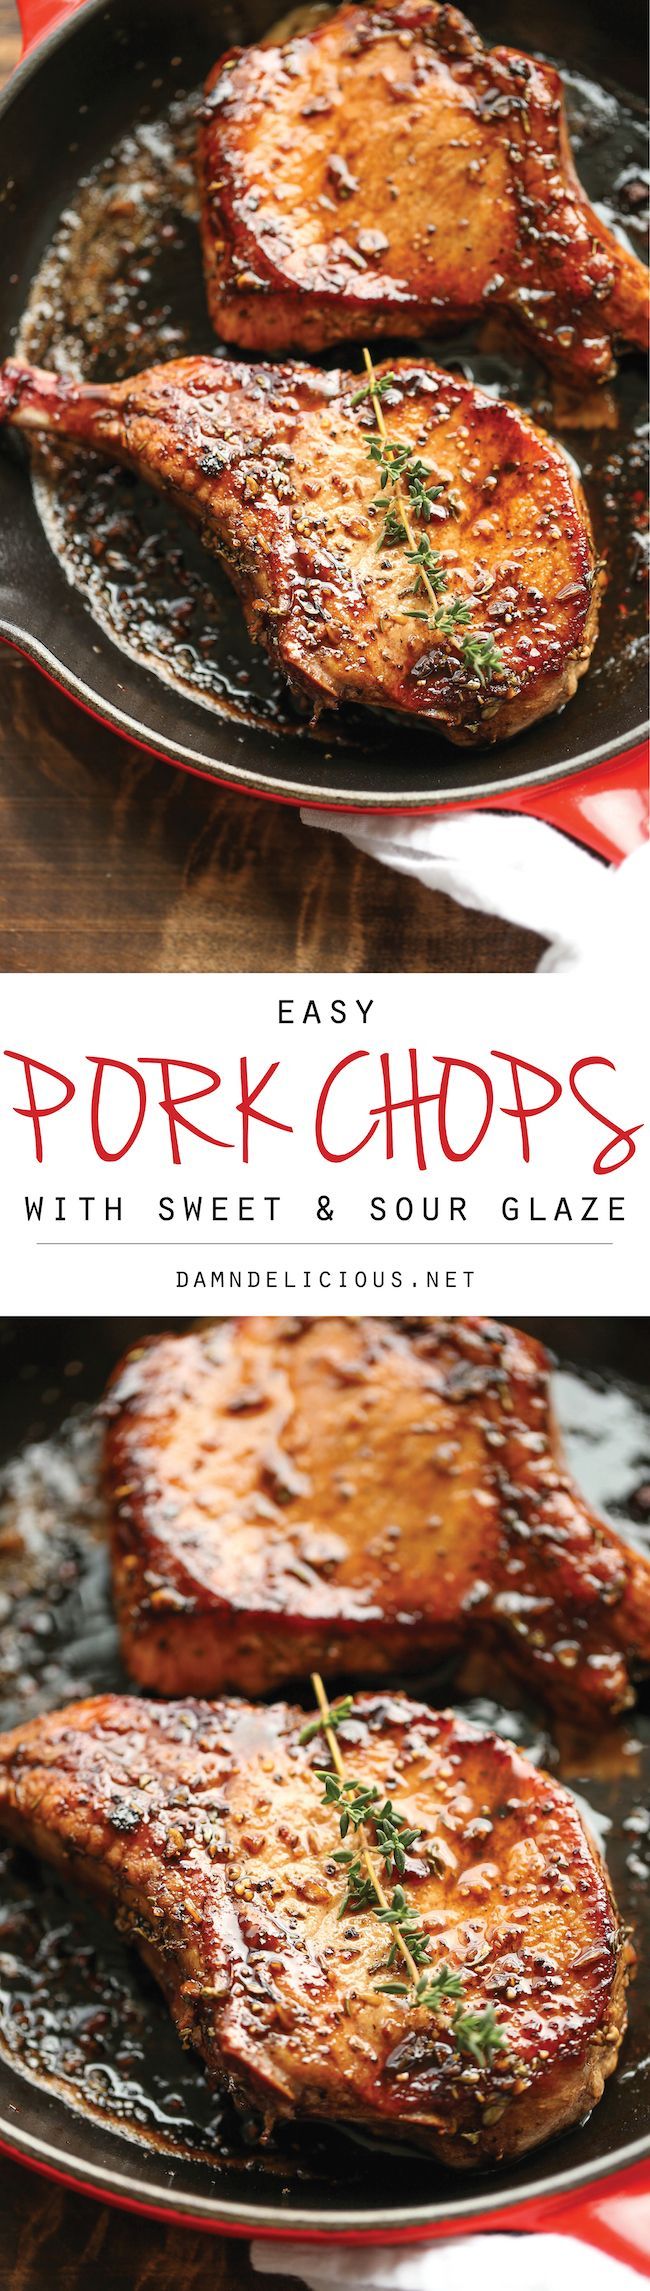 Easy Pork Chops with Sweet and Sour Glaze – The easiest, no-fuss, most amazing pork chops ever, made in 20 min from start to